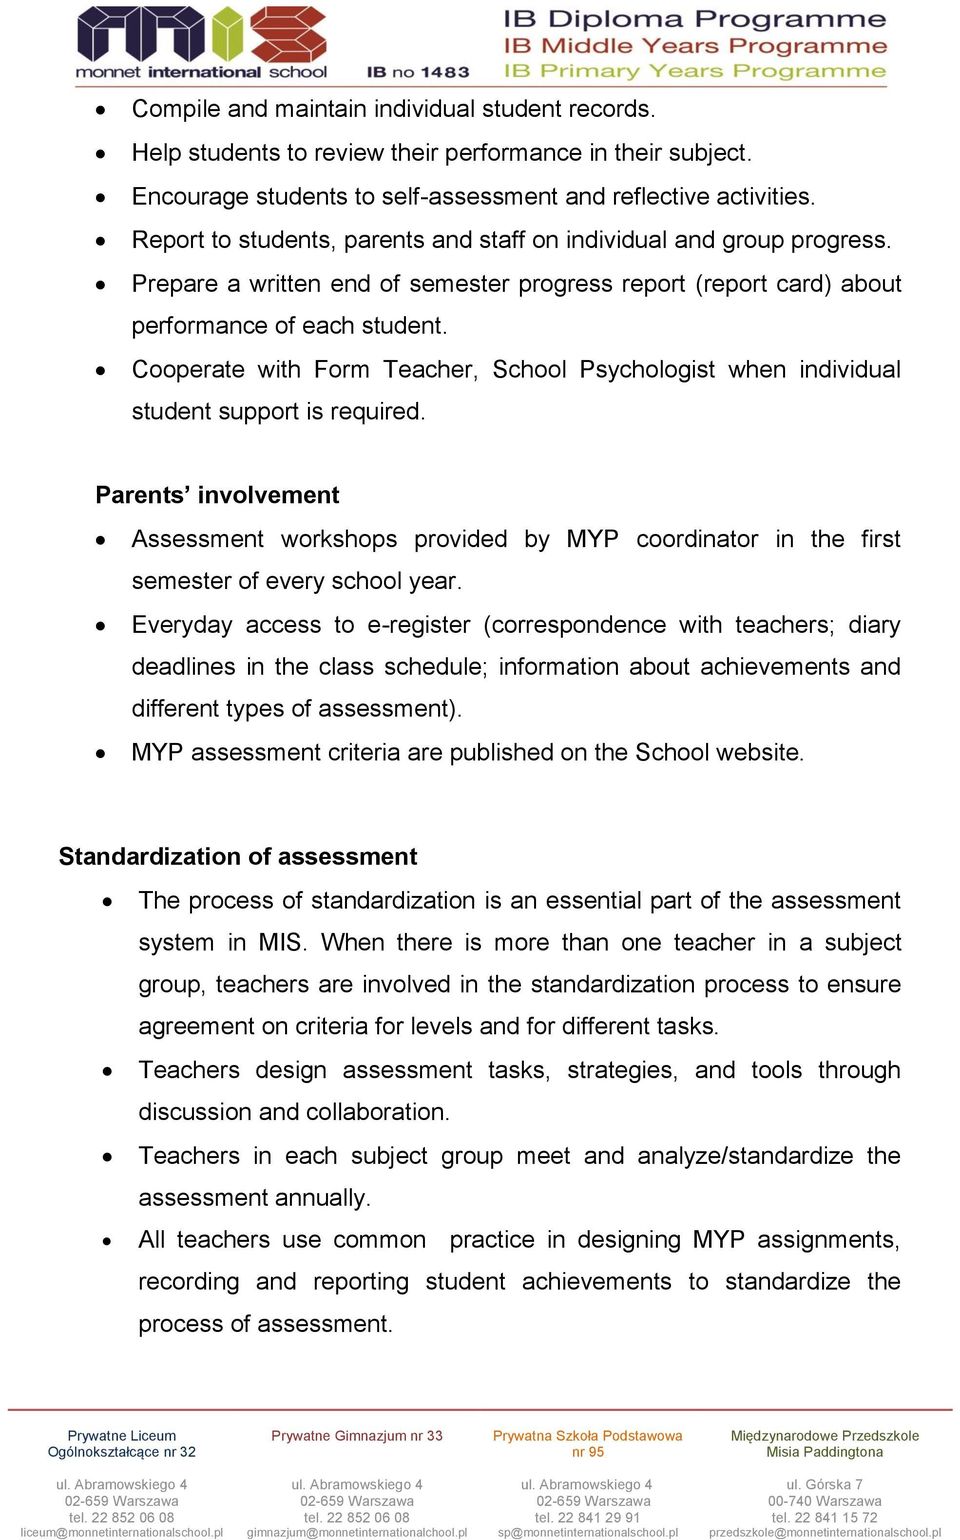 Cooperate with Form Teacher, School Psychologist when individual student support is required.